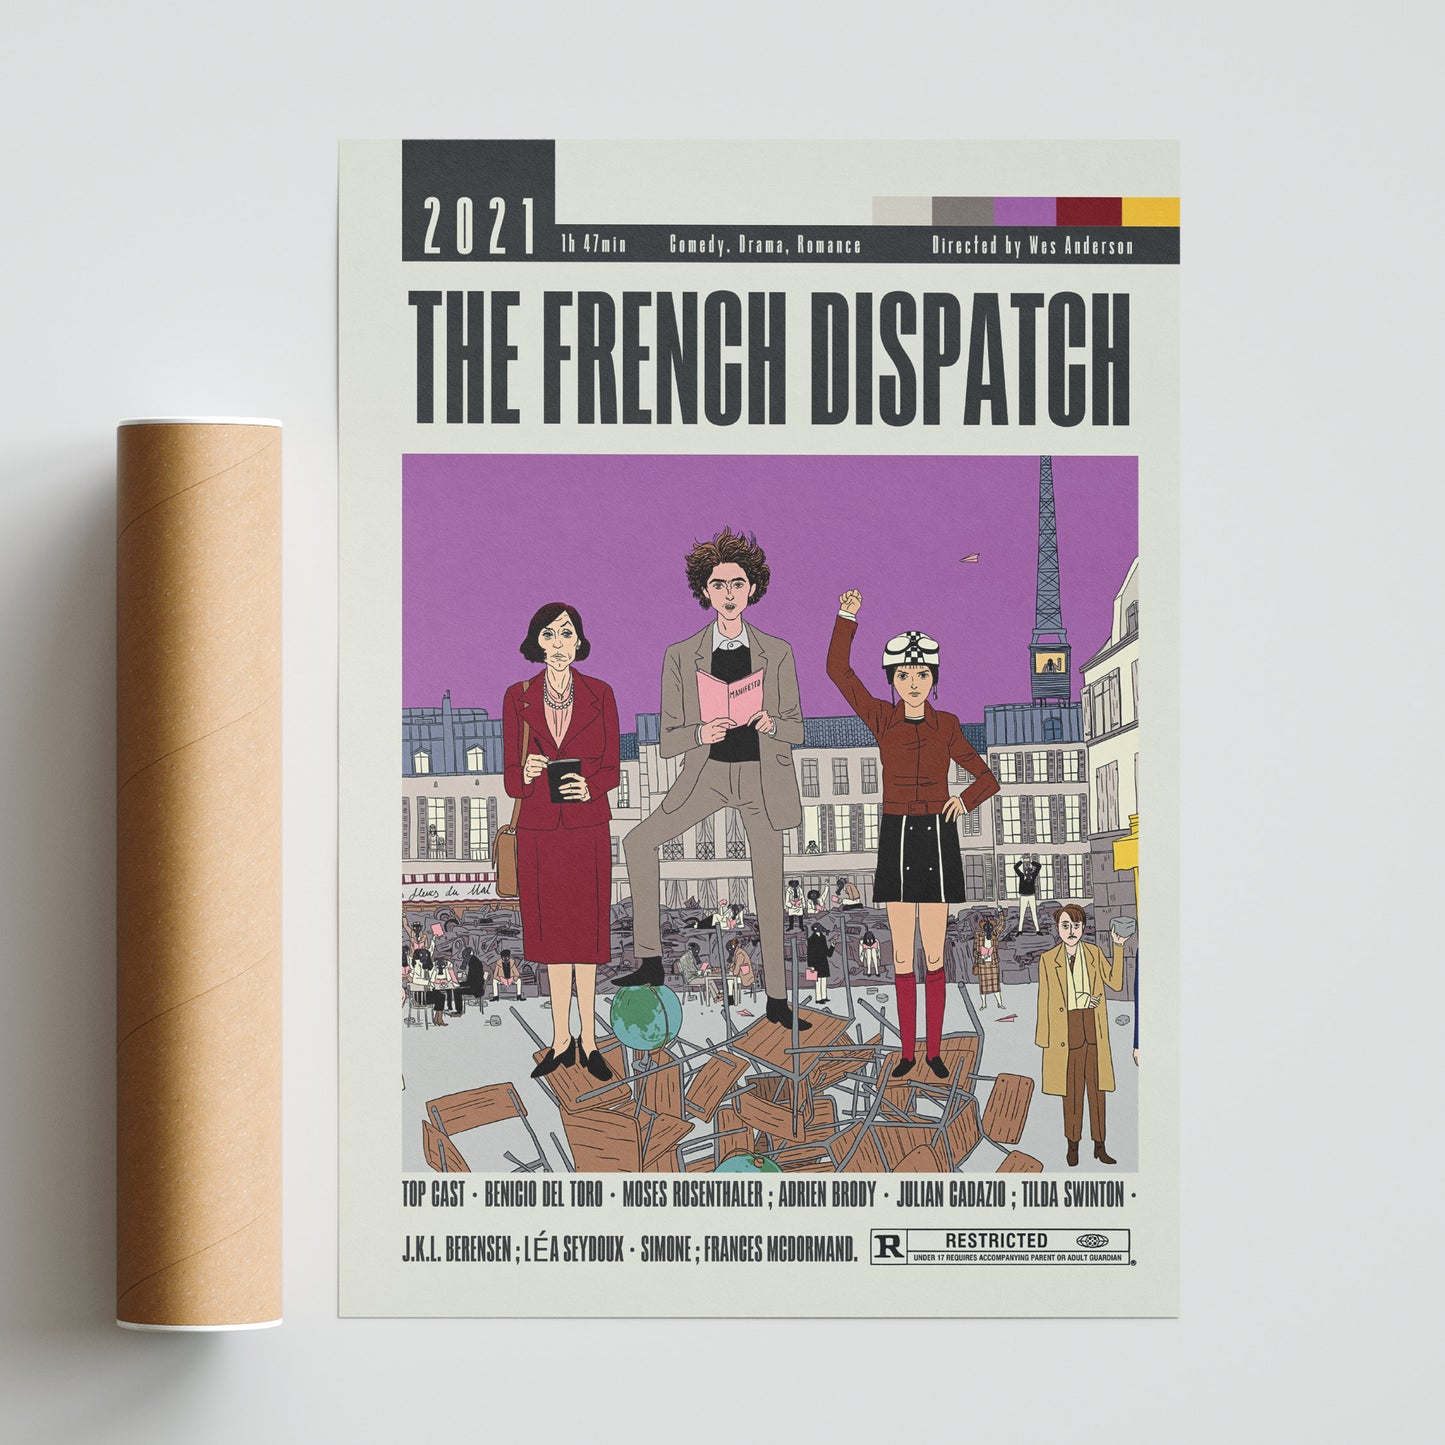 Immerse yourself in the whimsical world of Wes Anderson with The French Dispatch Poster. This collection of original movie posters features vintage-inspired art prints that are sure to elevate your wall decor. With unframed options available, you can customize your own minimalist movie poster and add a touch of cinematic charm to any room. Shop now for the perfect addition to your movie art collection.